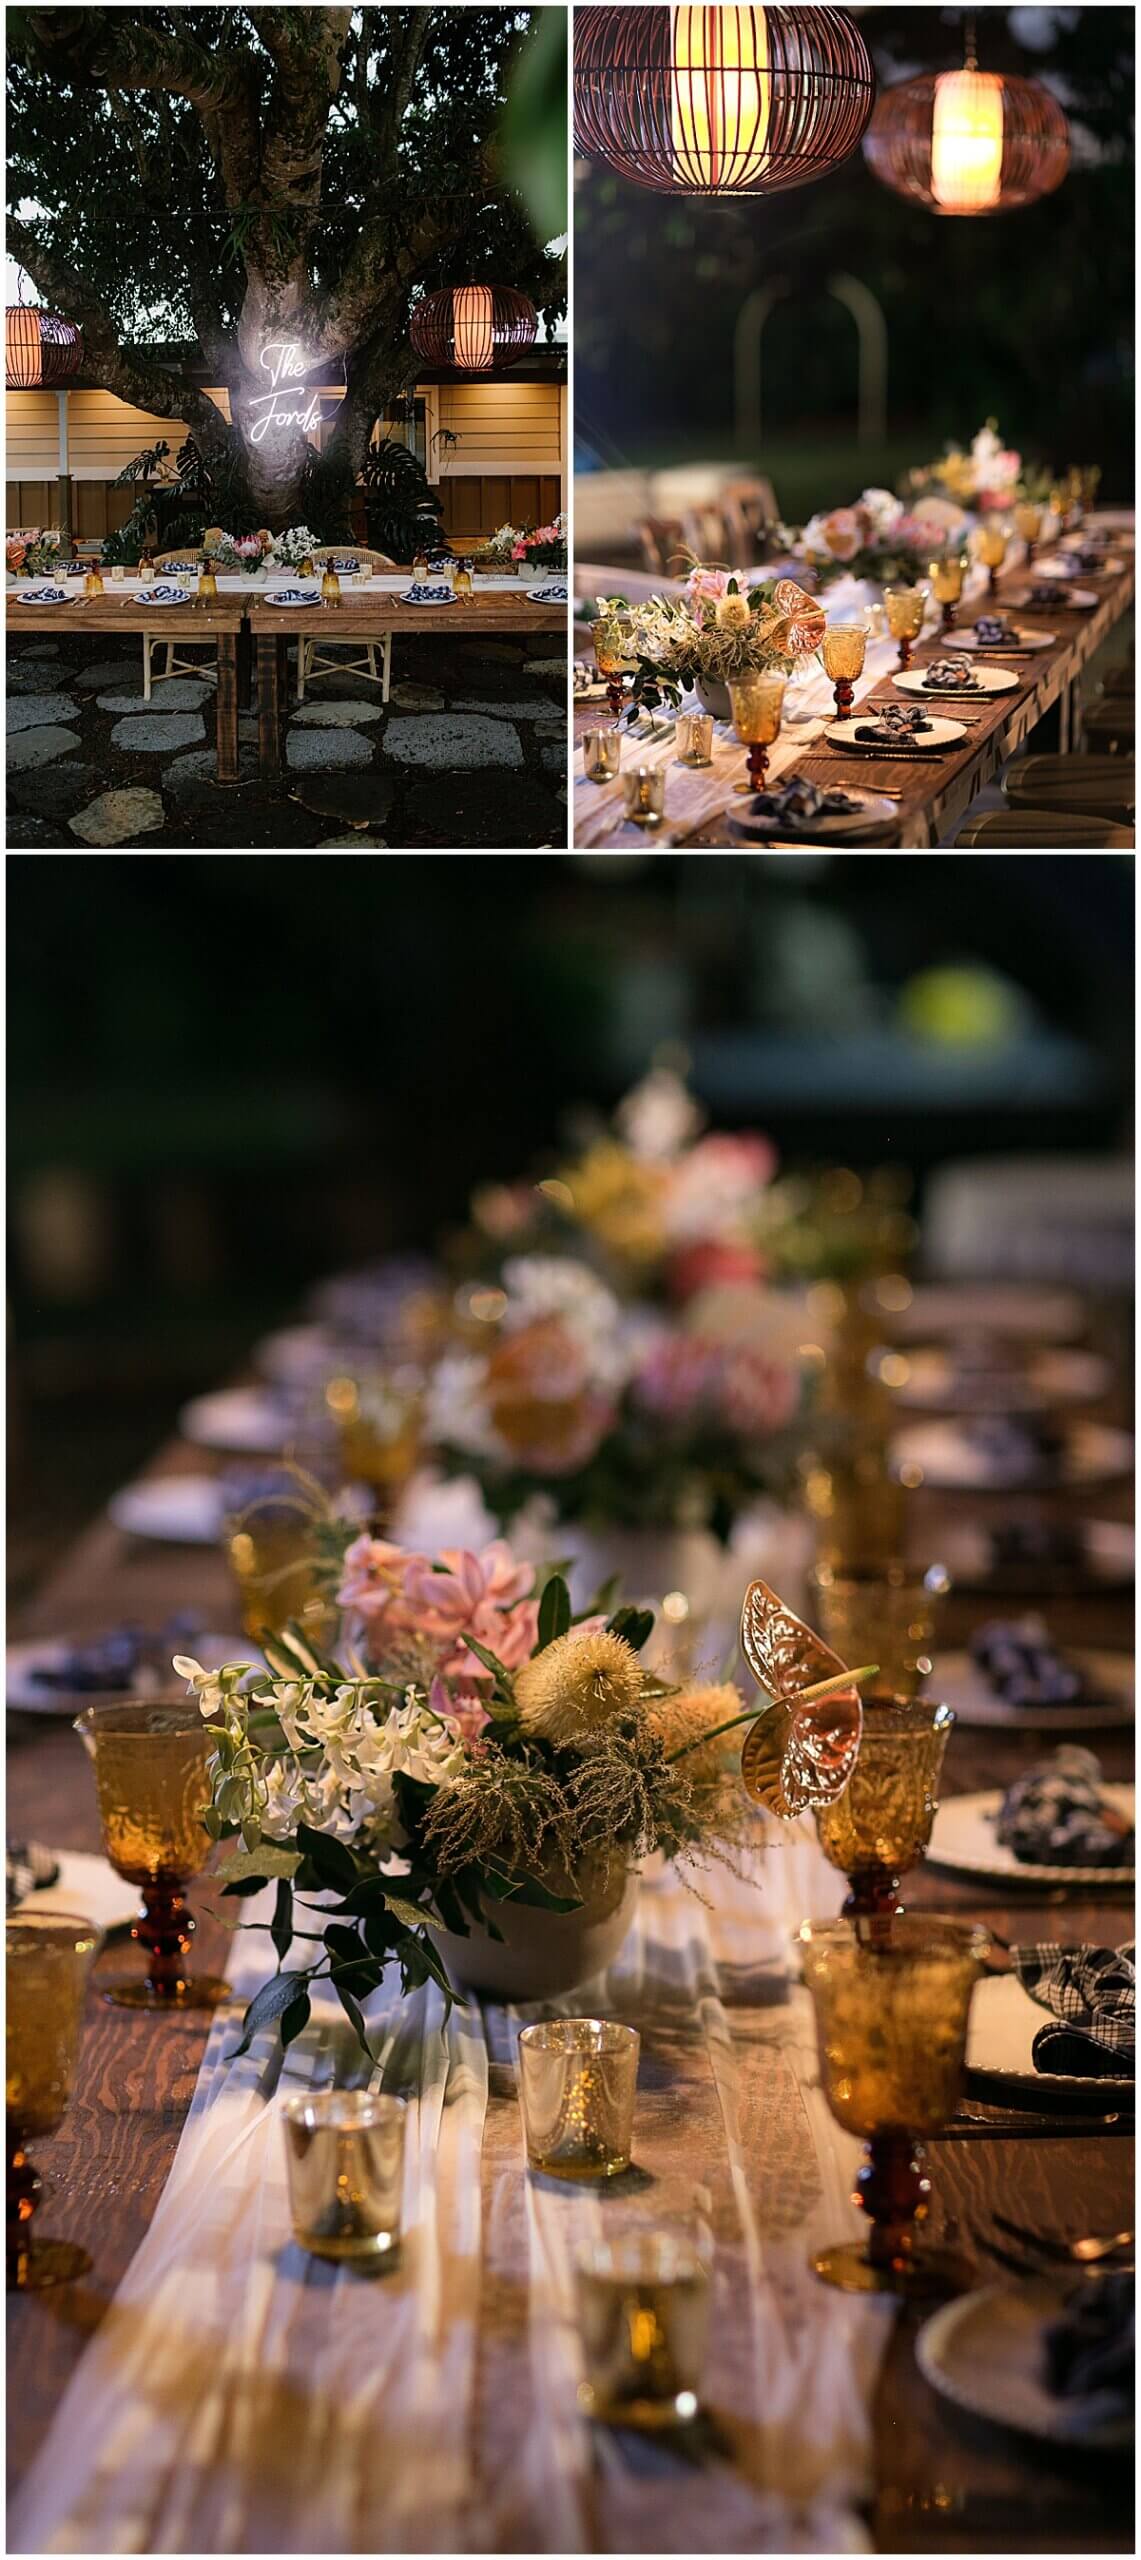 reception table details with florals and candles by Elle rose photo